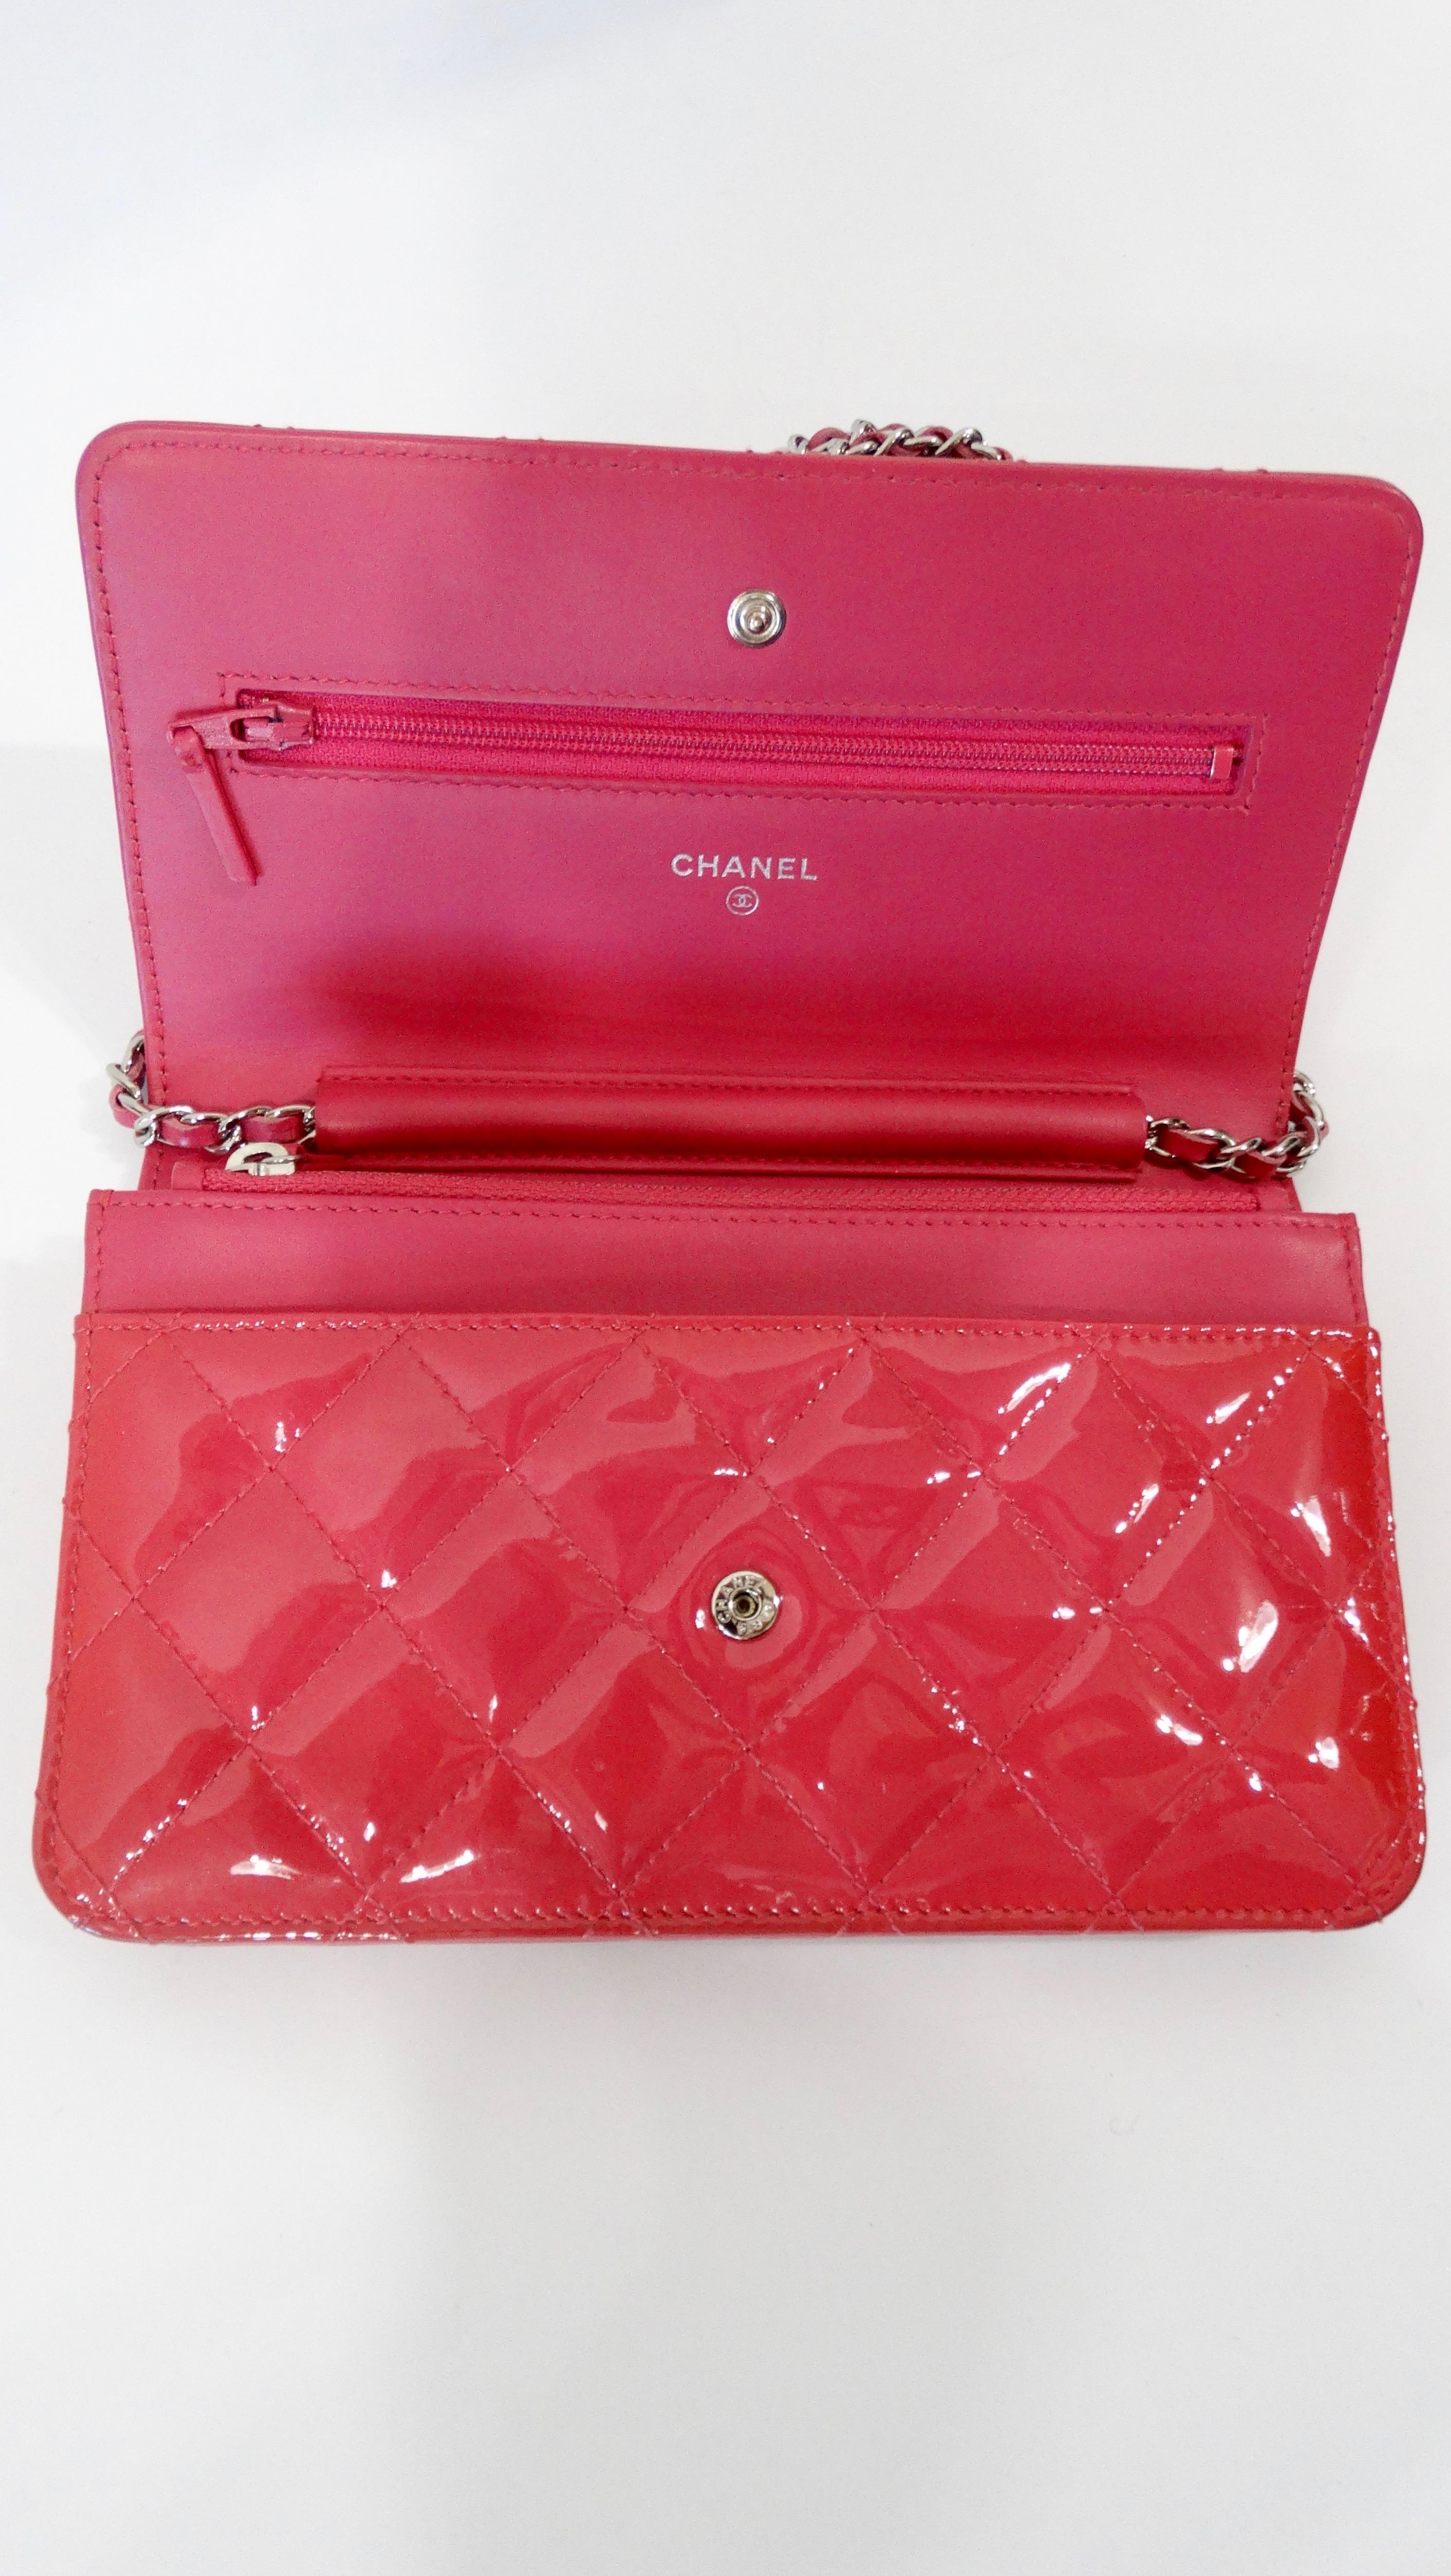 Red Chanel 2014 Quilted Patent Leather Wallet Crossbody Bag 